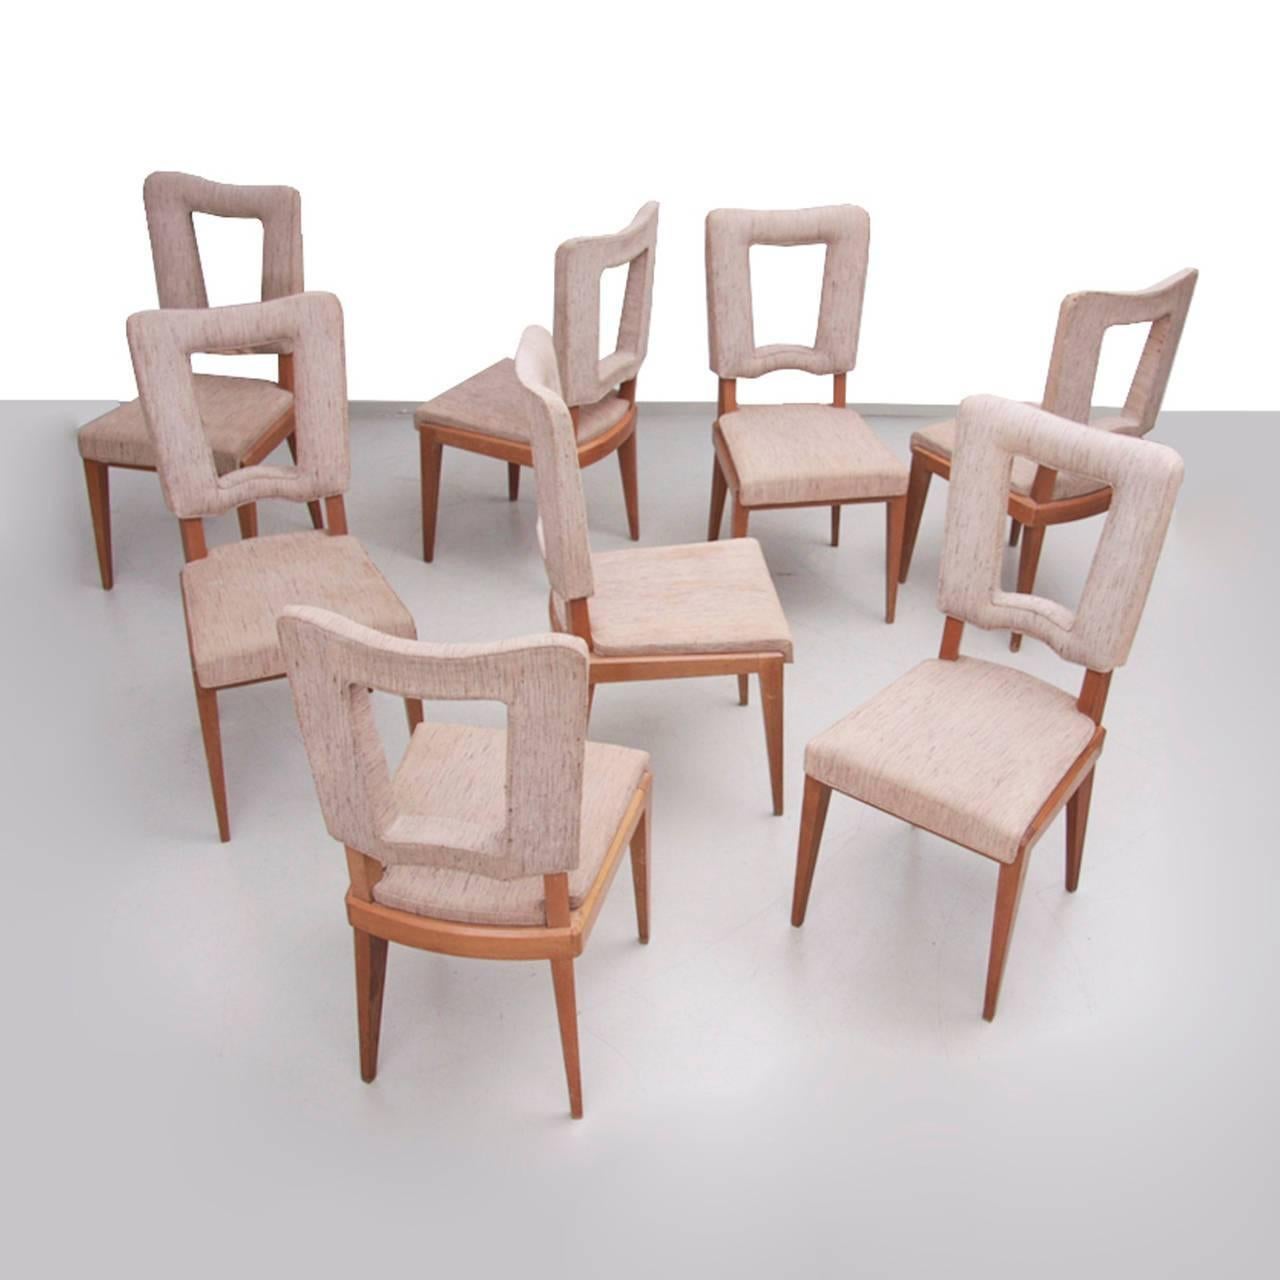 Set of eight high end production chairs in the manner of Jean Royère in original condition. Heavy solid construction. Reupholstery advised. That is something that could be done in our atelier or you can do it yourself.